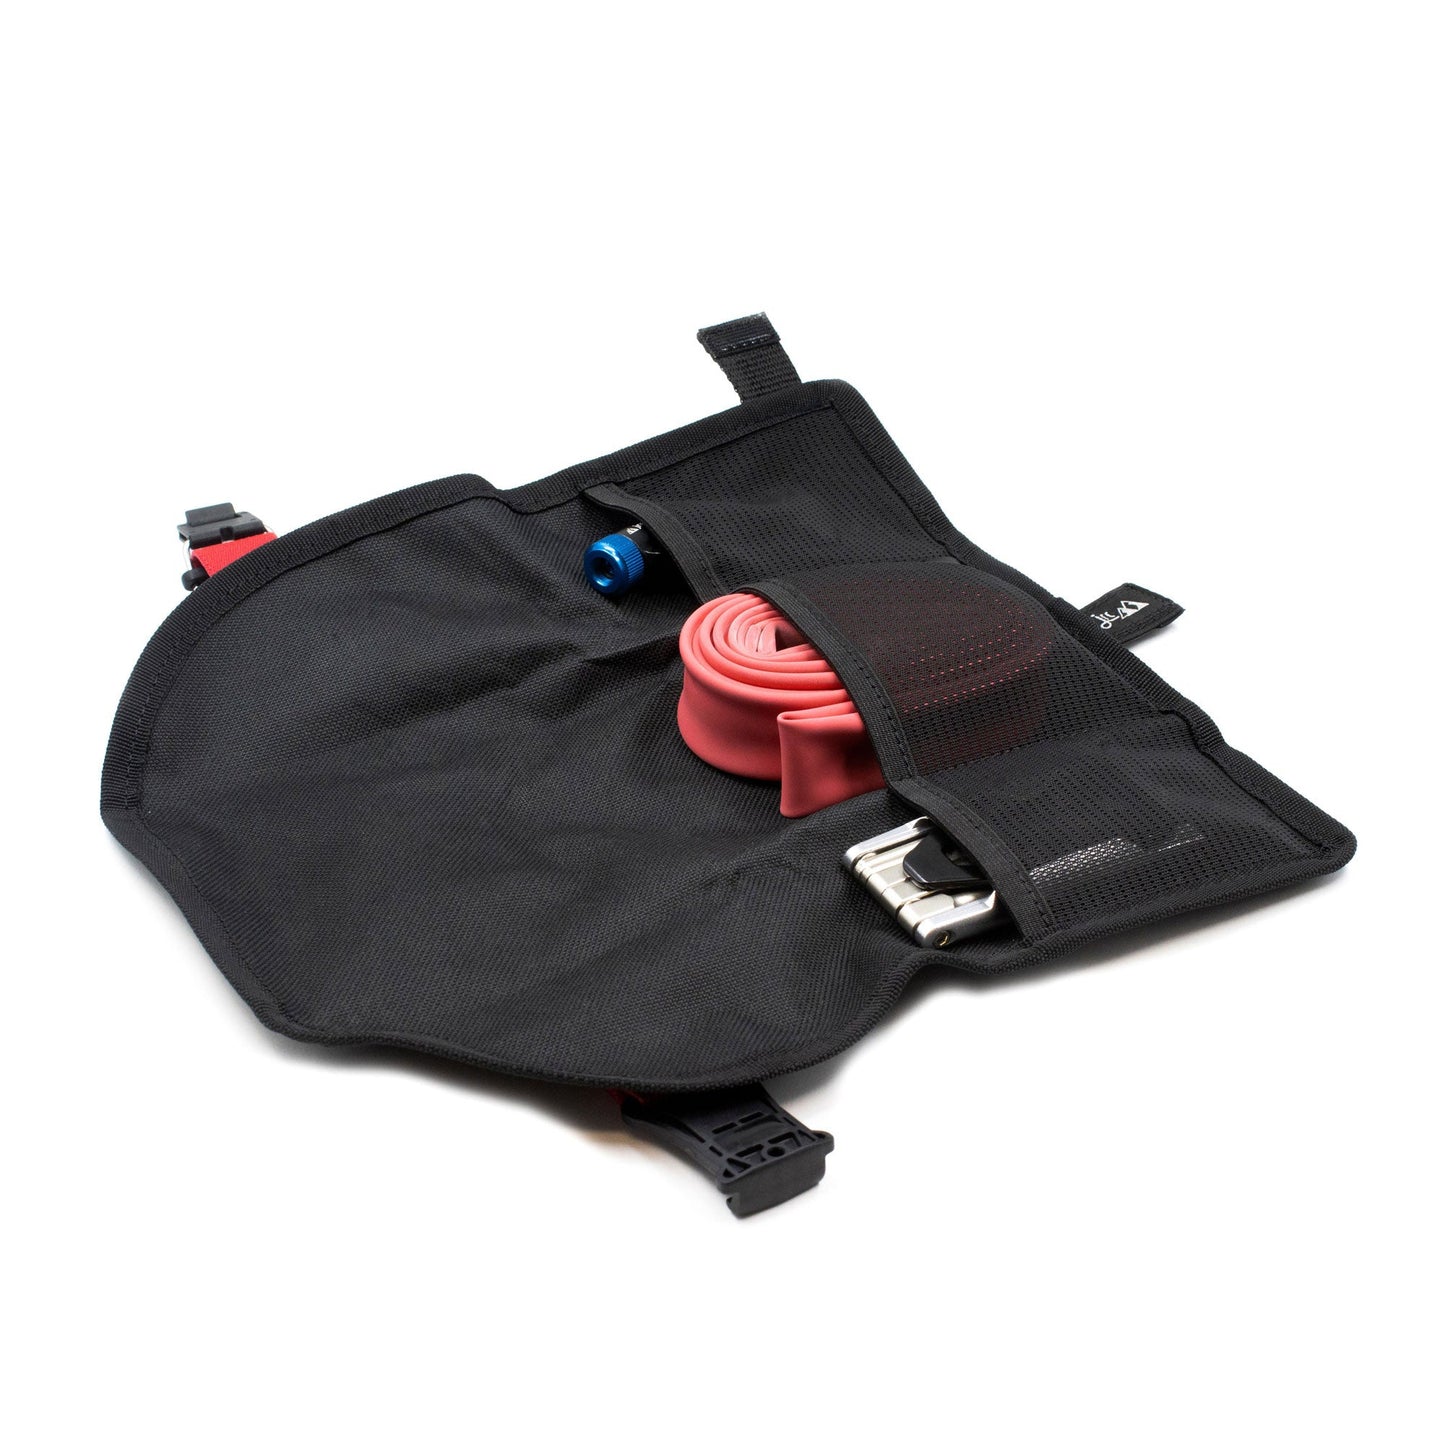 Bicycle saddle roll bag. Compact design with three mesh compartments inside